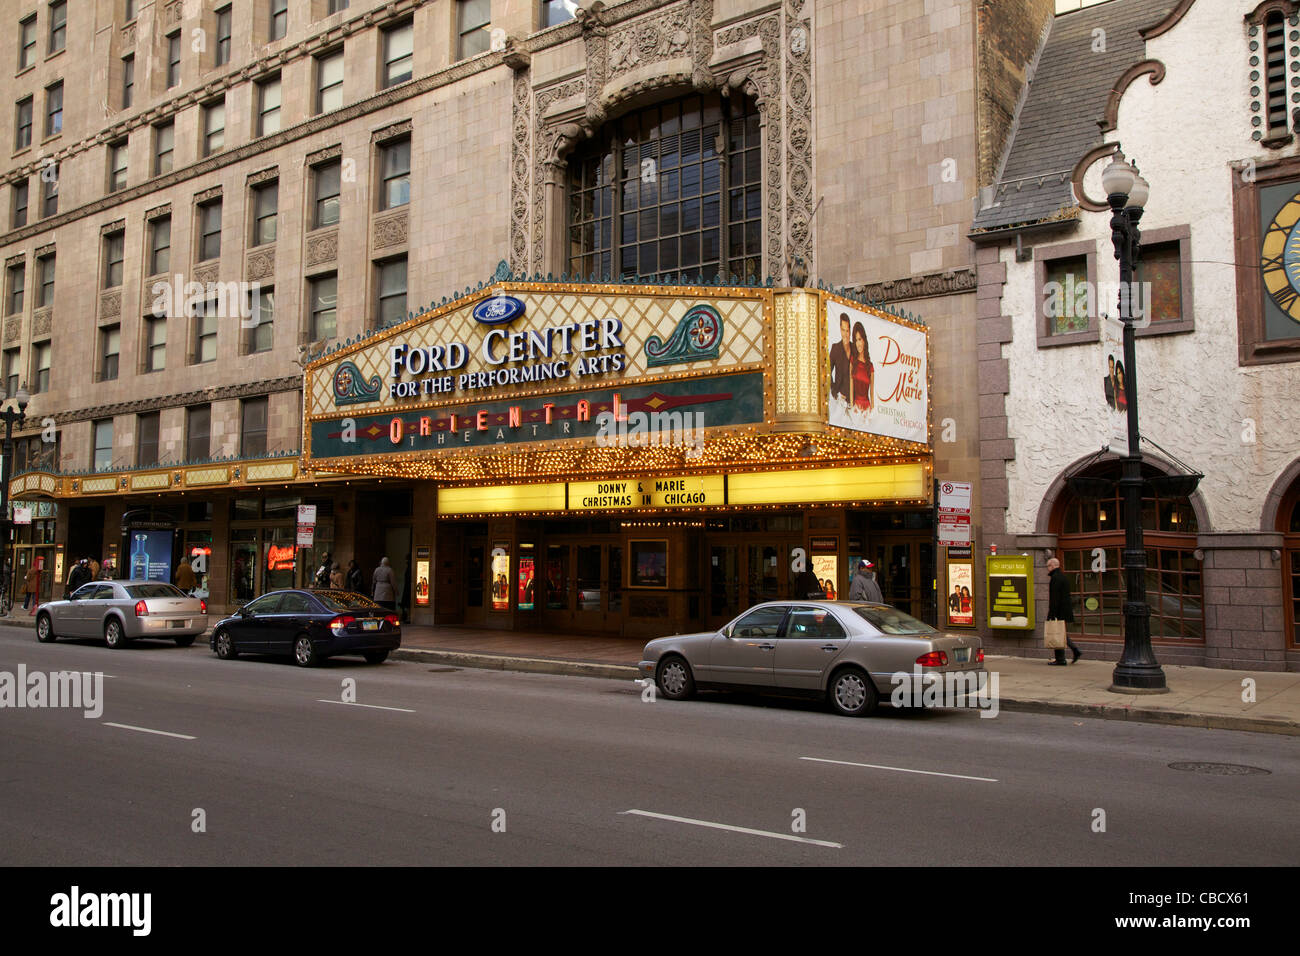 Ford Center for Performing Arts/Oriental Theater. Chicago, Illinois Stockfoto